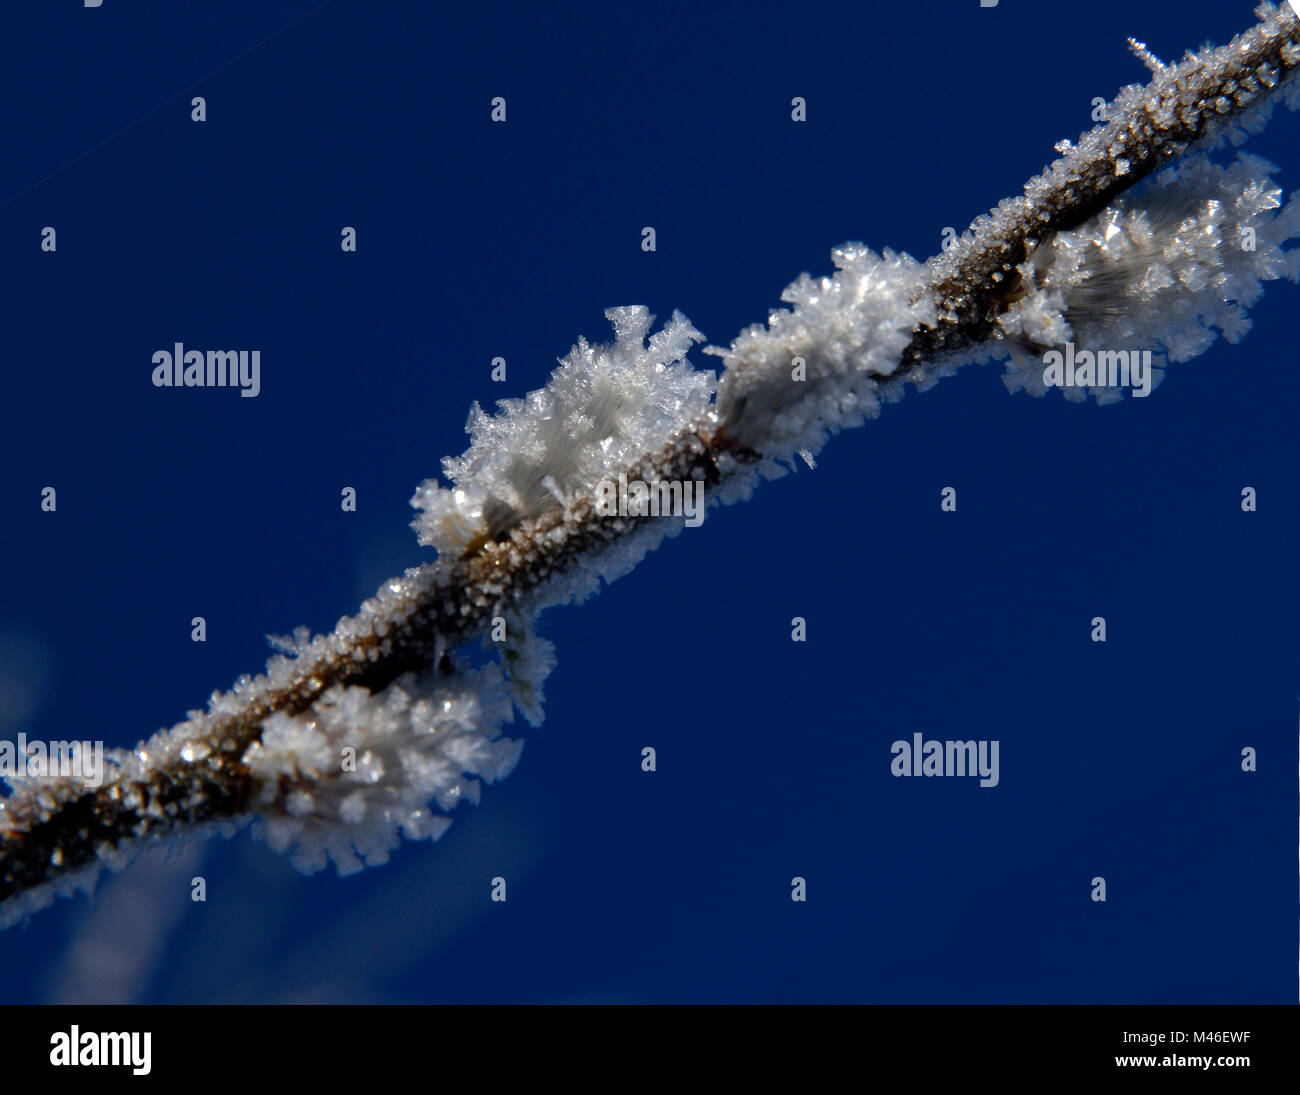 ice crystals on willow catkin Stock Photo